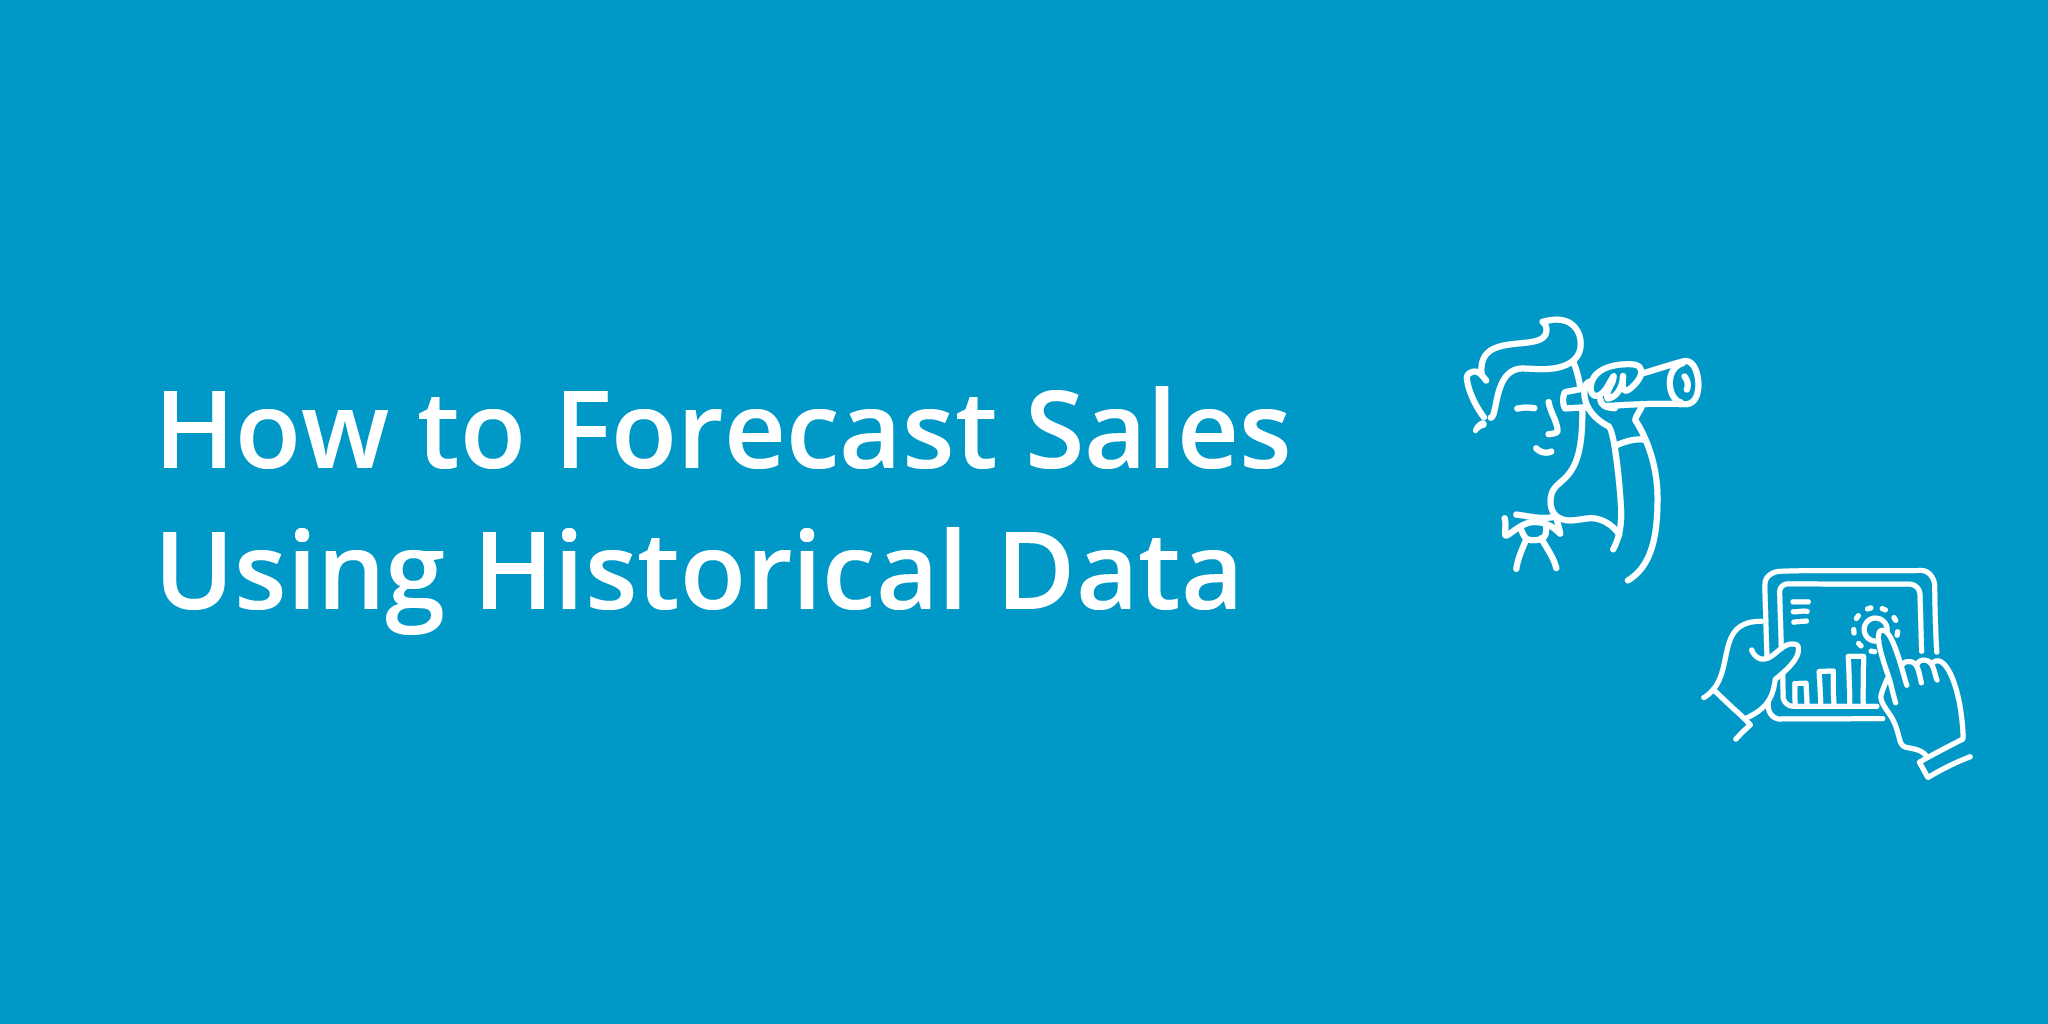 How to Forecast Sales Using Historical Data